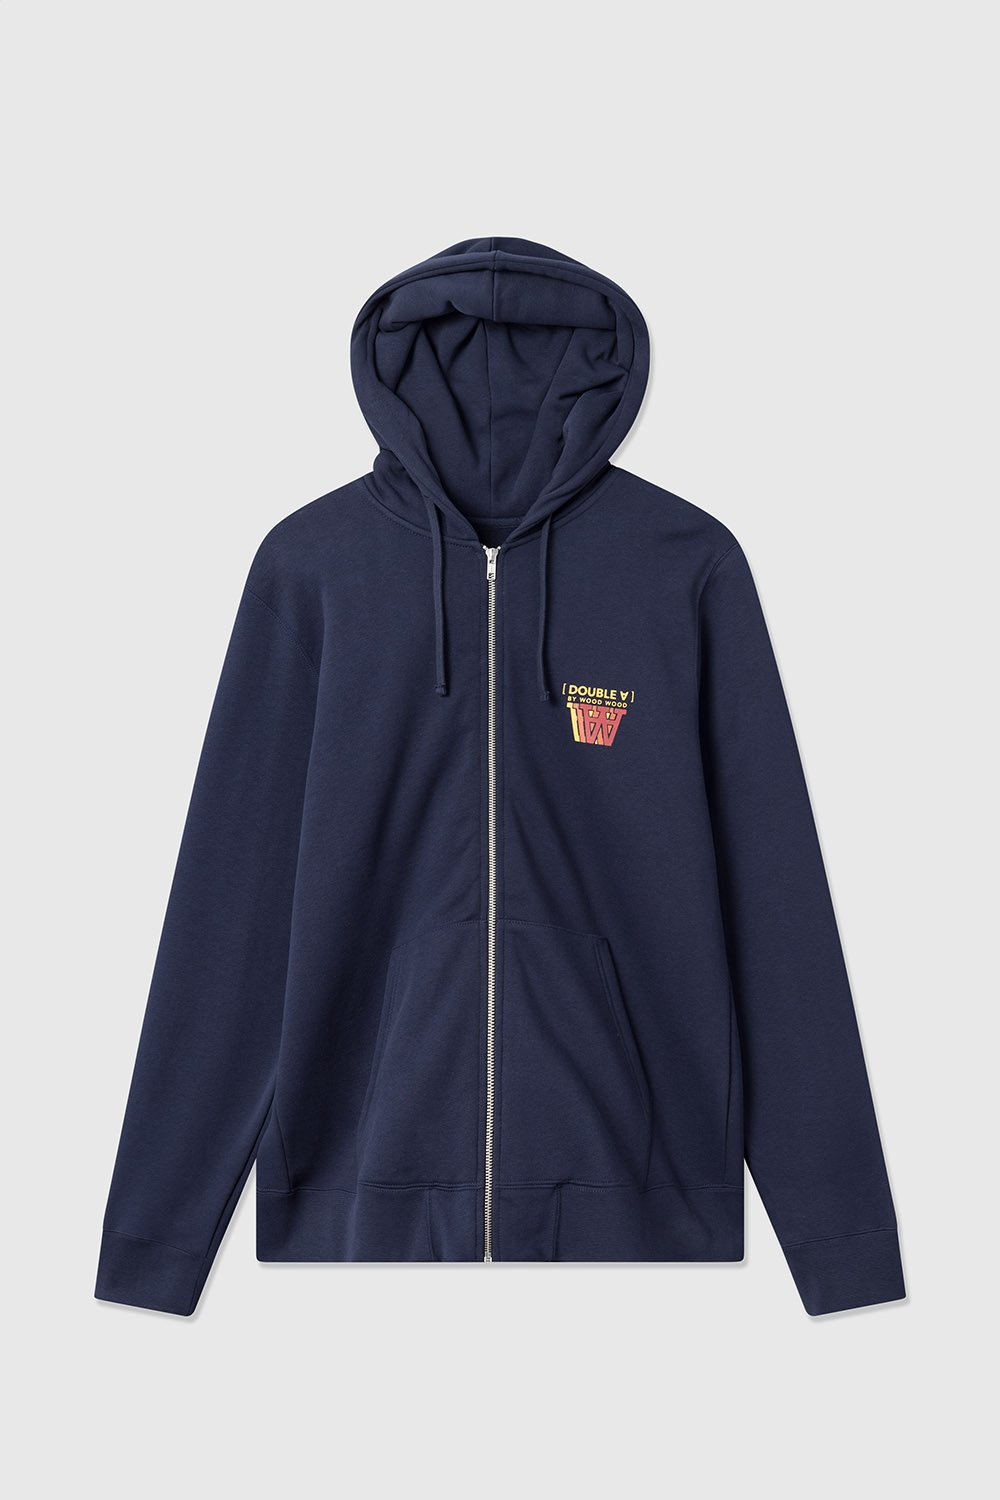 Double A by Wood Wood Zan stacked logo zip hoodie Navy | WoodWood.com